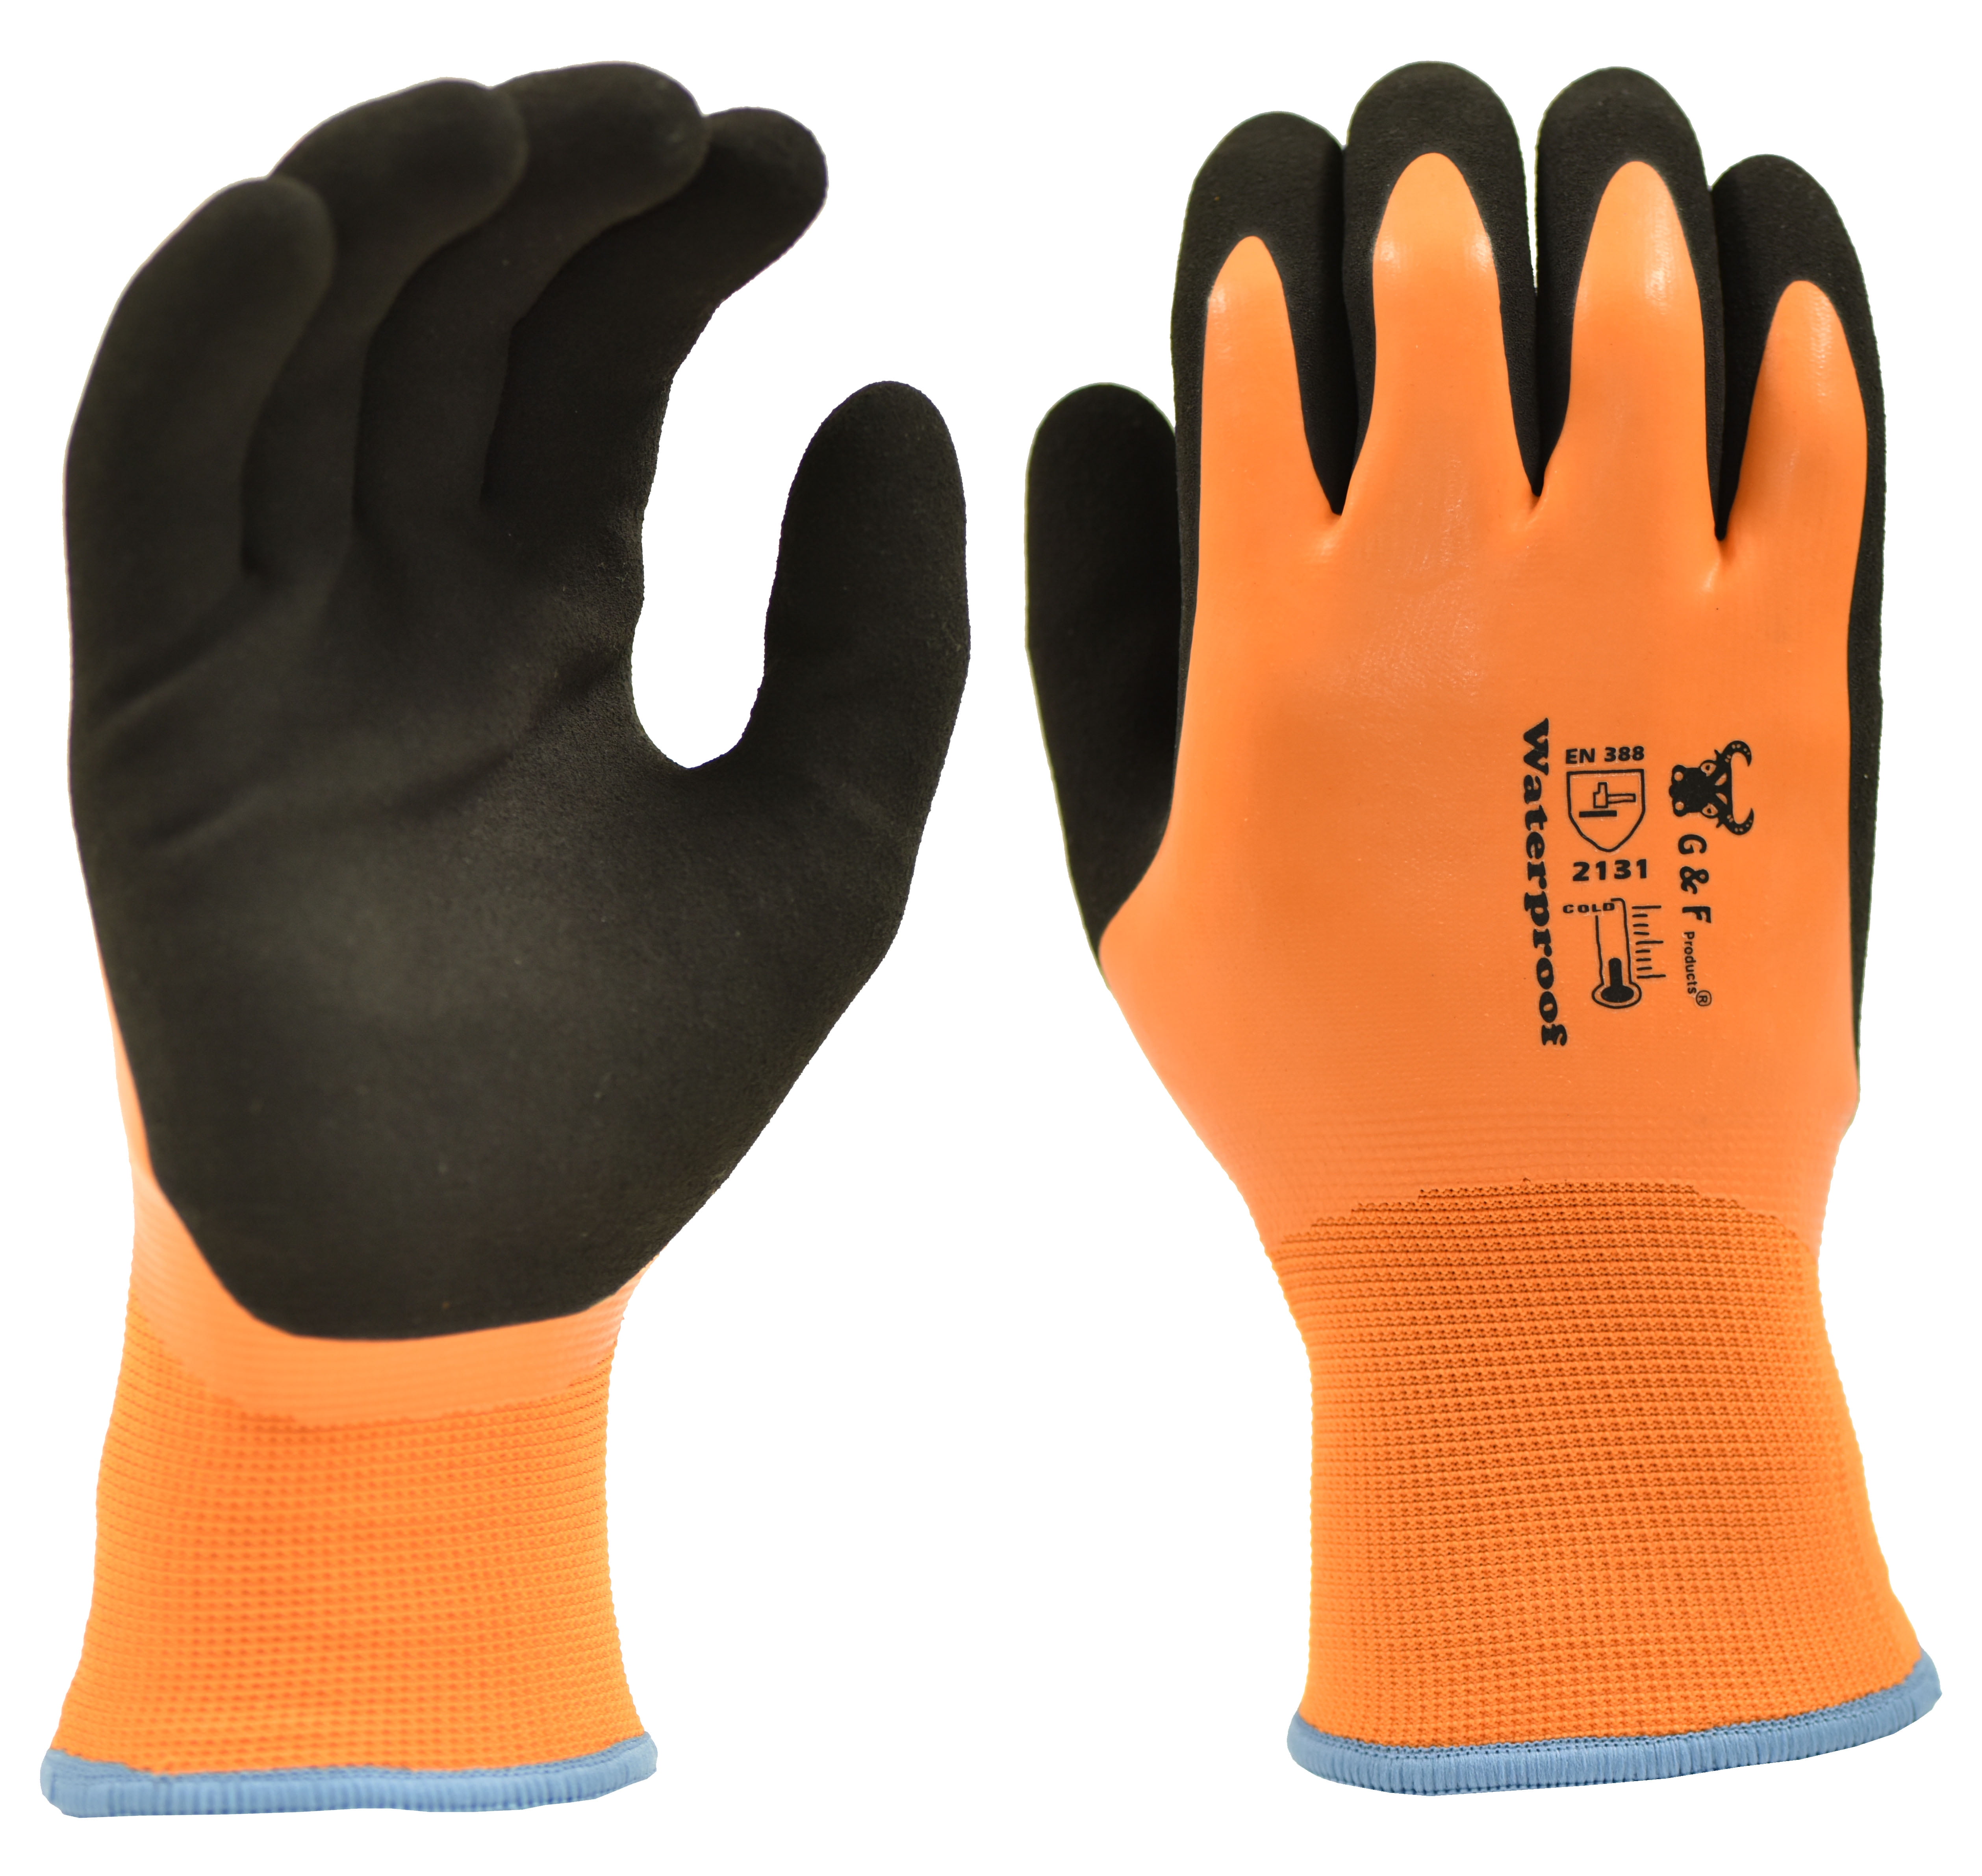 Detailing Dry Ice Gloves and Essential PPE